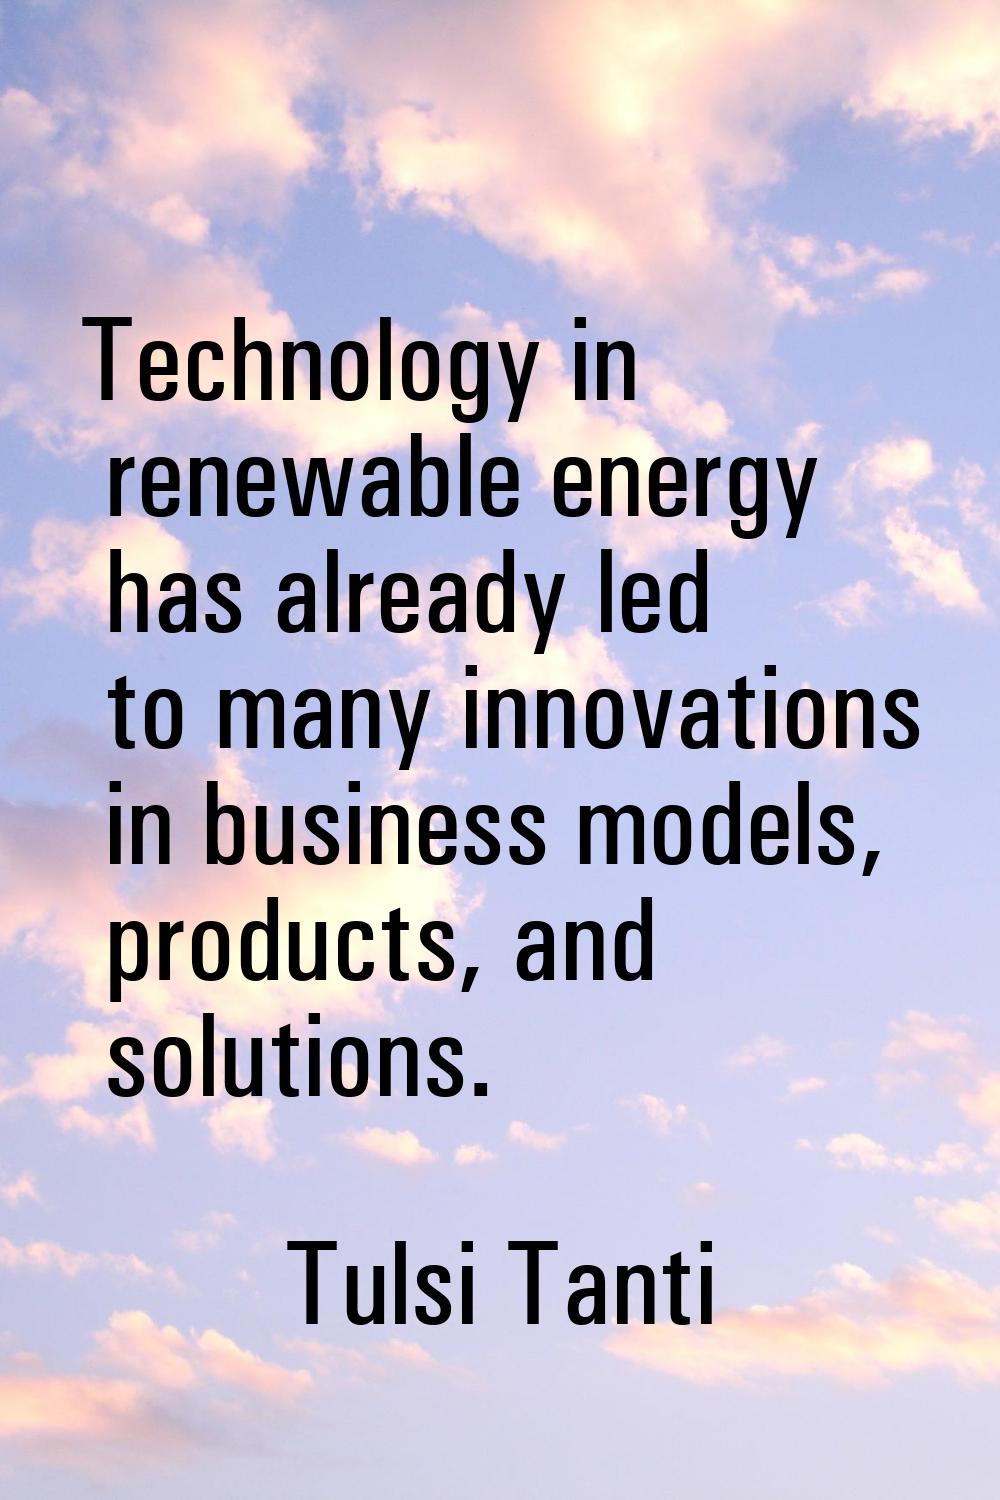 Technology in renewable energy has already led to many innovations in business models, products, an